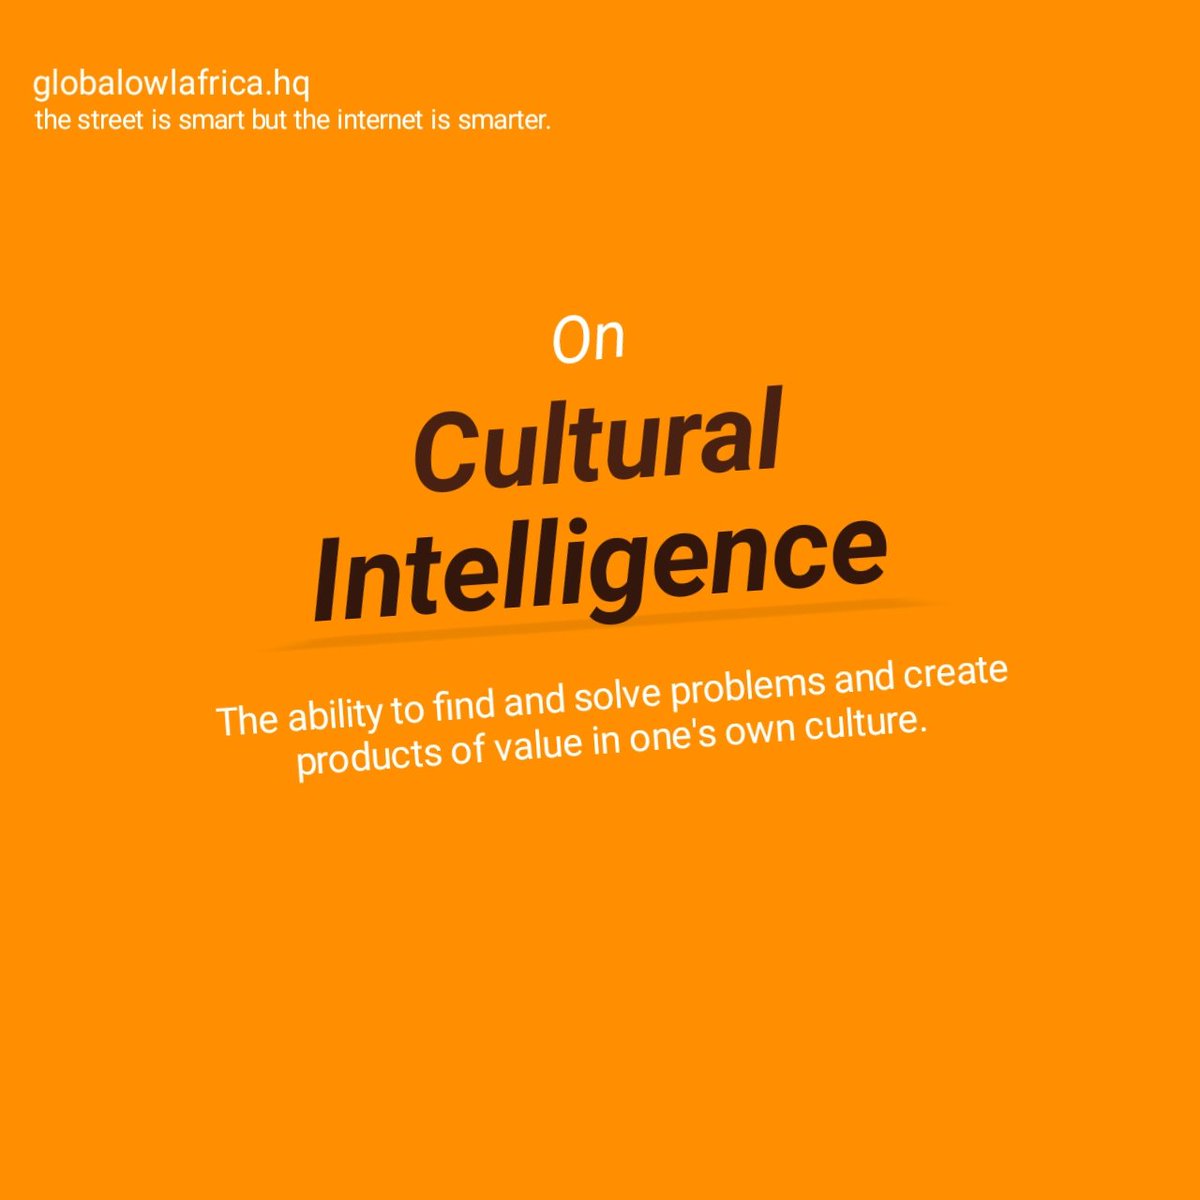 The Essential Intelligence For The 21st Century. #brand #positioning #CulturalIntelligence #Owl4Africa